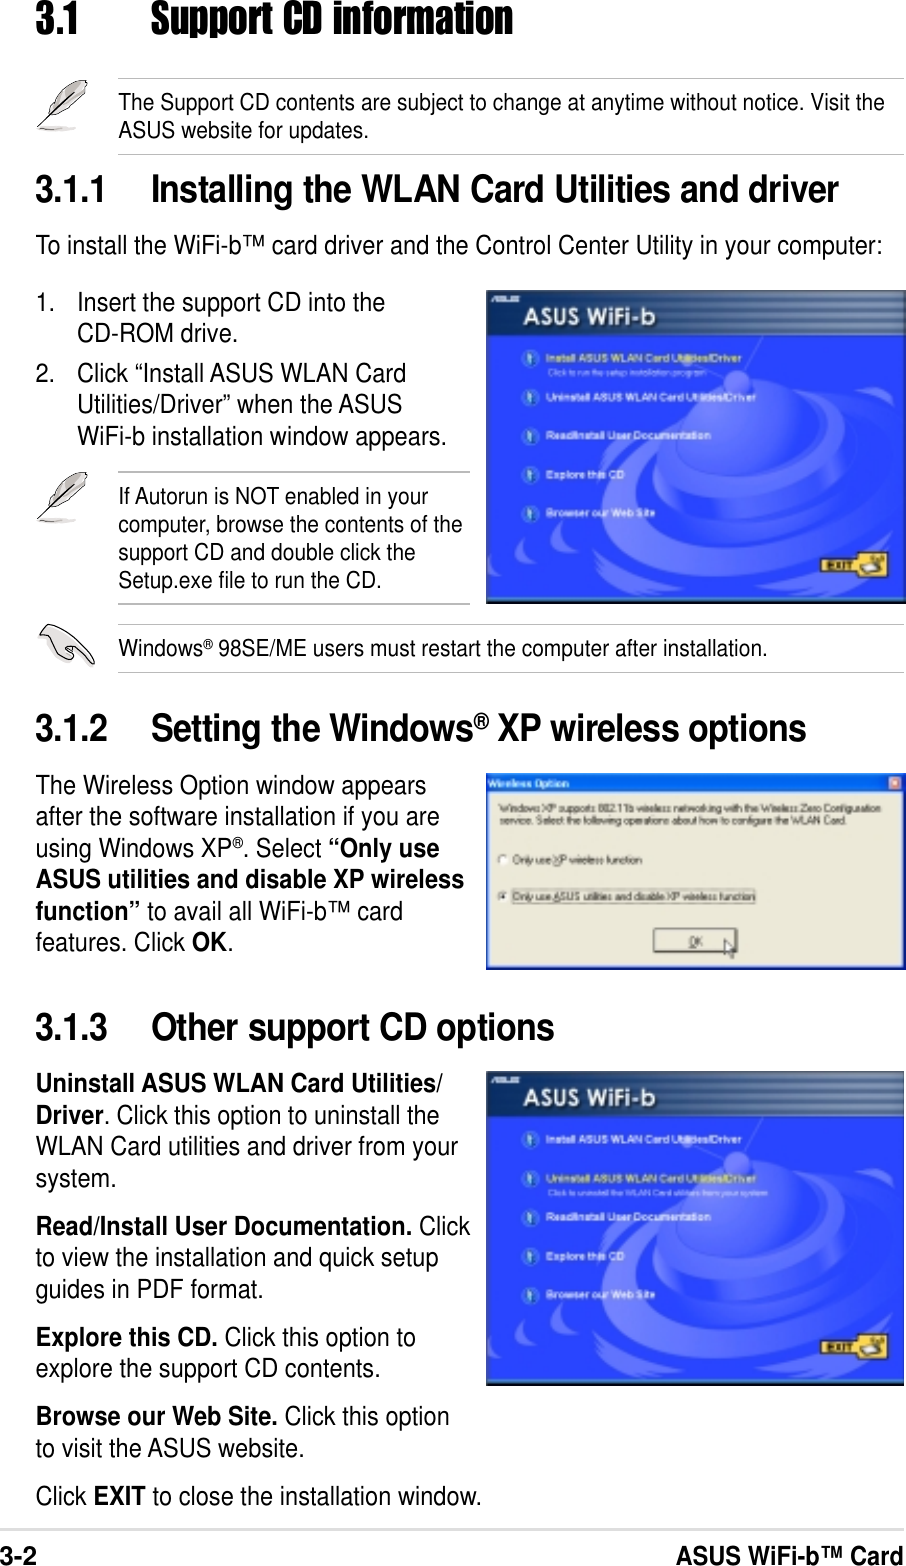 3-2ASUS WiFi-b™ Card3.1.2 Setting the Windows® XP wireless optionsThe Wireless Option window appearsafter the software installation if you areusing Windows XP®. Select “Only useASUS utilities and disable XP wirelessfunction” to avail all WiFi-b™ cardfeatures. Click OK.3.1 Support CD informationThe Support CD contents are subject to change at anytime without notice. Visit theASUS website for updates.3.1.1 Installing the WLAN Card Utilities and driverTo install the WiFi-b™ card driver and the Control Center Utility in your computer:1. Insert the support CD into theCD-ROM drive.2. Click “Install ASUS WLAN CardUtilities/Driver” when the ASUSWiFi-b installation window appears.3.1.3 Other support CD optionsUninstall ASUS WLAN Card Utilities/Driver. Click this option to uninstall theWLAN Card utilities and driver from yoursystem.Read/Install User Documentation. Clickto view the installation and quick setupguides in PDF format.Explore this CD. Click this option toexplore the support CD contents.Browse our Web Site. Click this optionto visit the ASUS website.Click EXIT to close the installation window.If Autorun is NOT enabled in yourcomputer, browse the contents of thesupport CD and double click theSetup.exe file to run the CD.Windows® 98SE/ME users must restart the computer after installation.